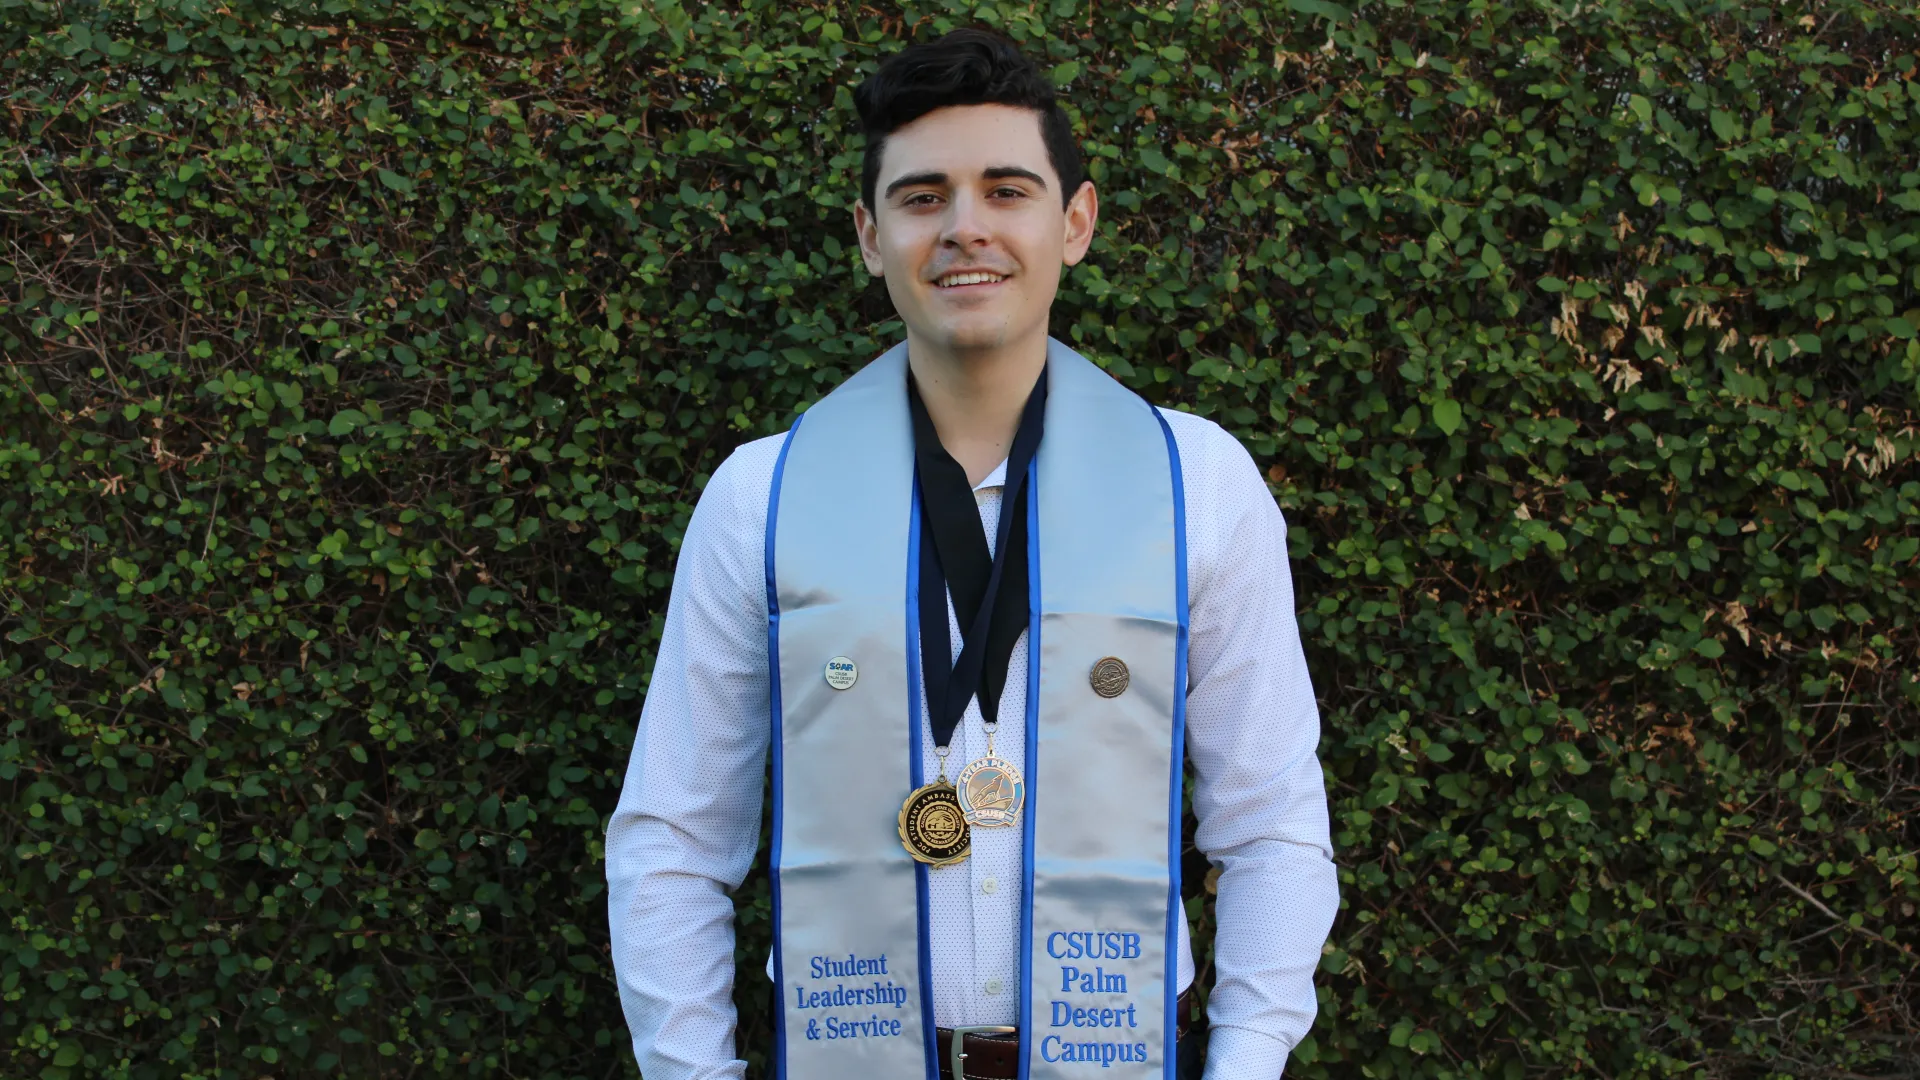 Nick Conoway is the first University Legacy Scholar to graduate from the Palm Desert Campus